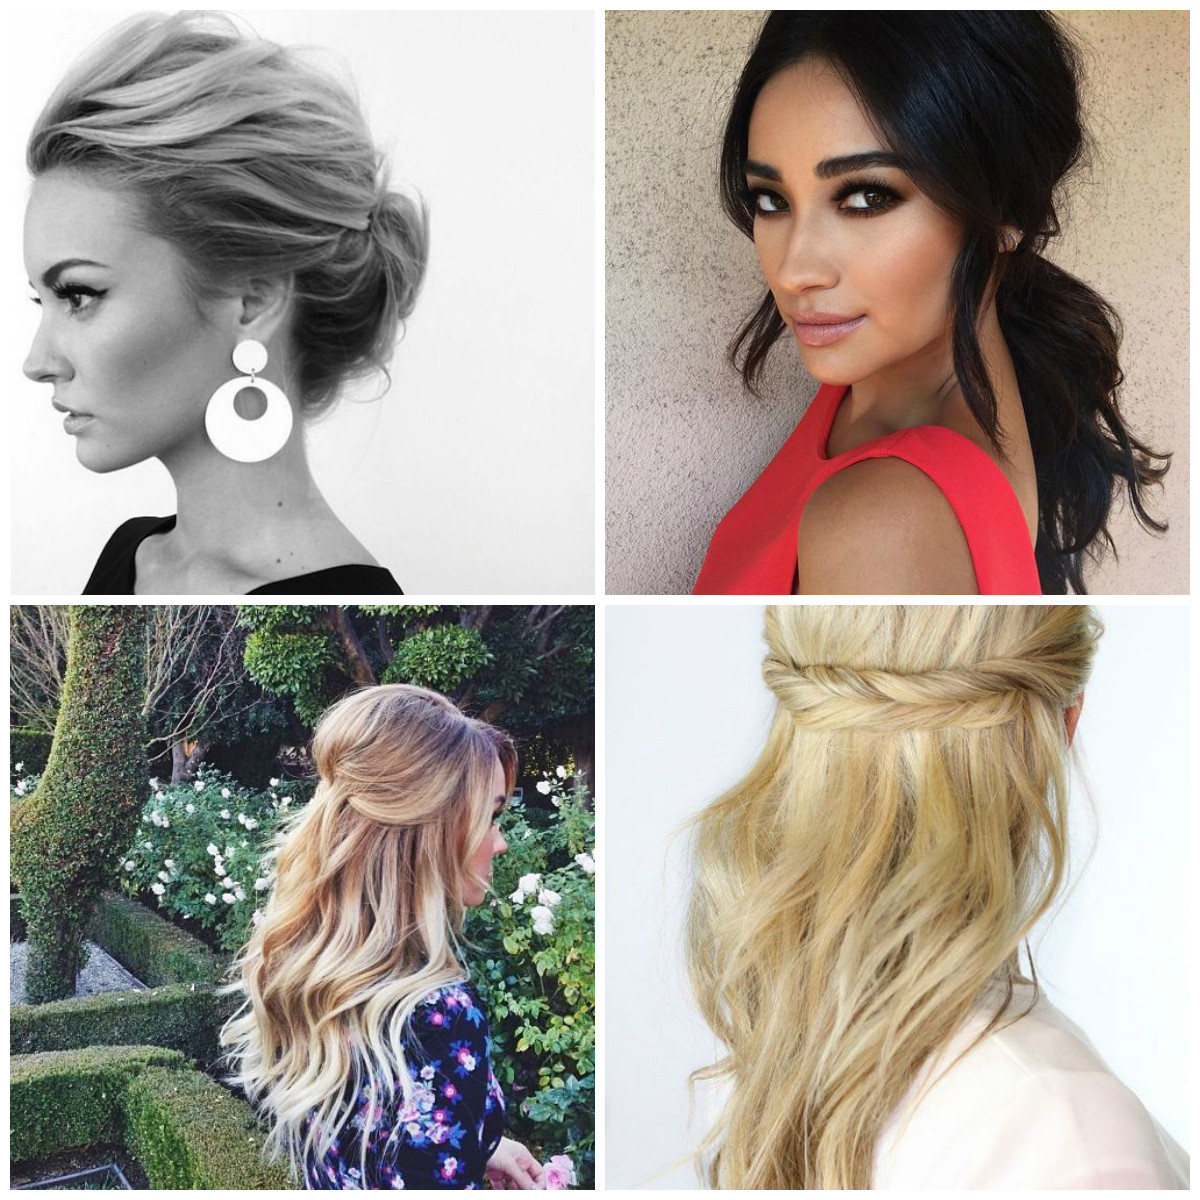 Hairstyles To Wear To A Wedding
 4 No Fuss Hairstyles to Wear to a Wedding The Beauty Vanity